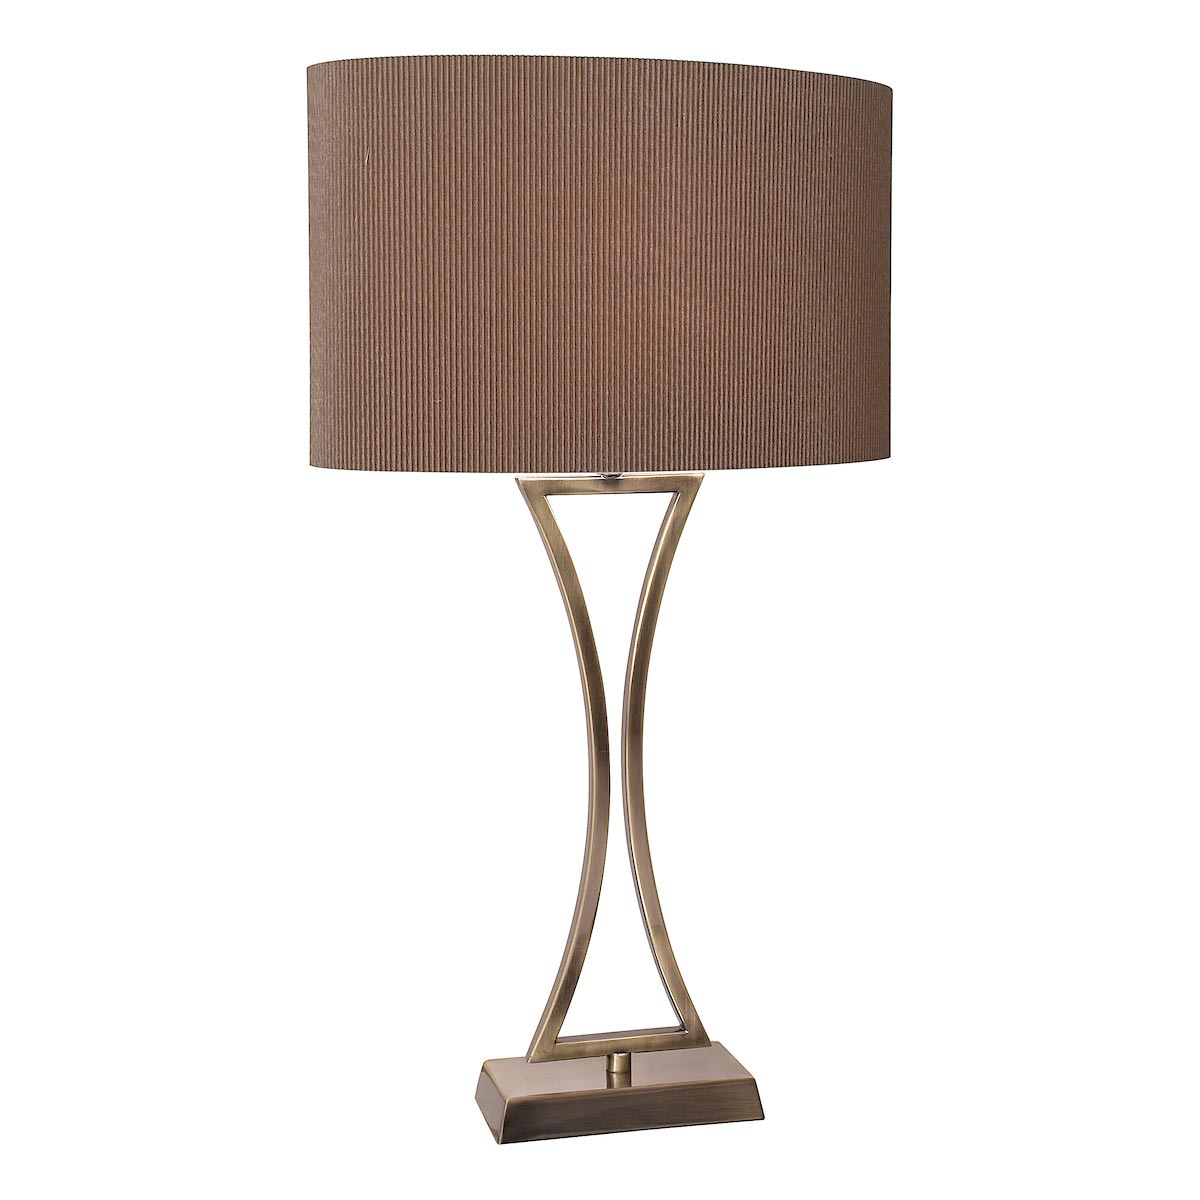 Dar Oporto Stylish 1 Light Antique Brass Table Lamp Brown Oval Shade